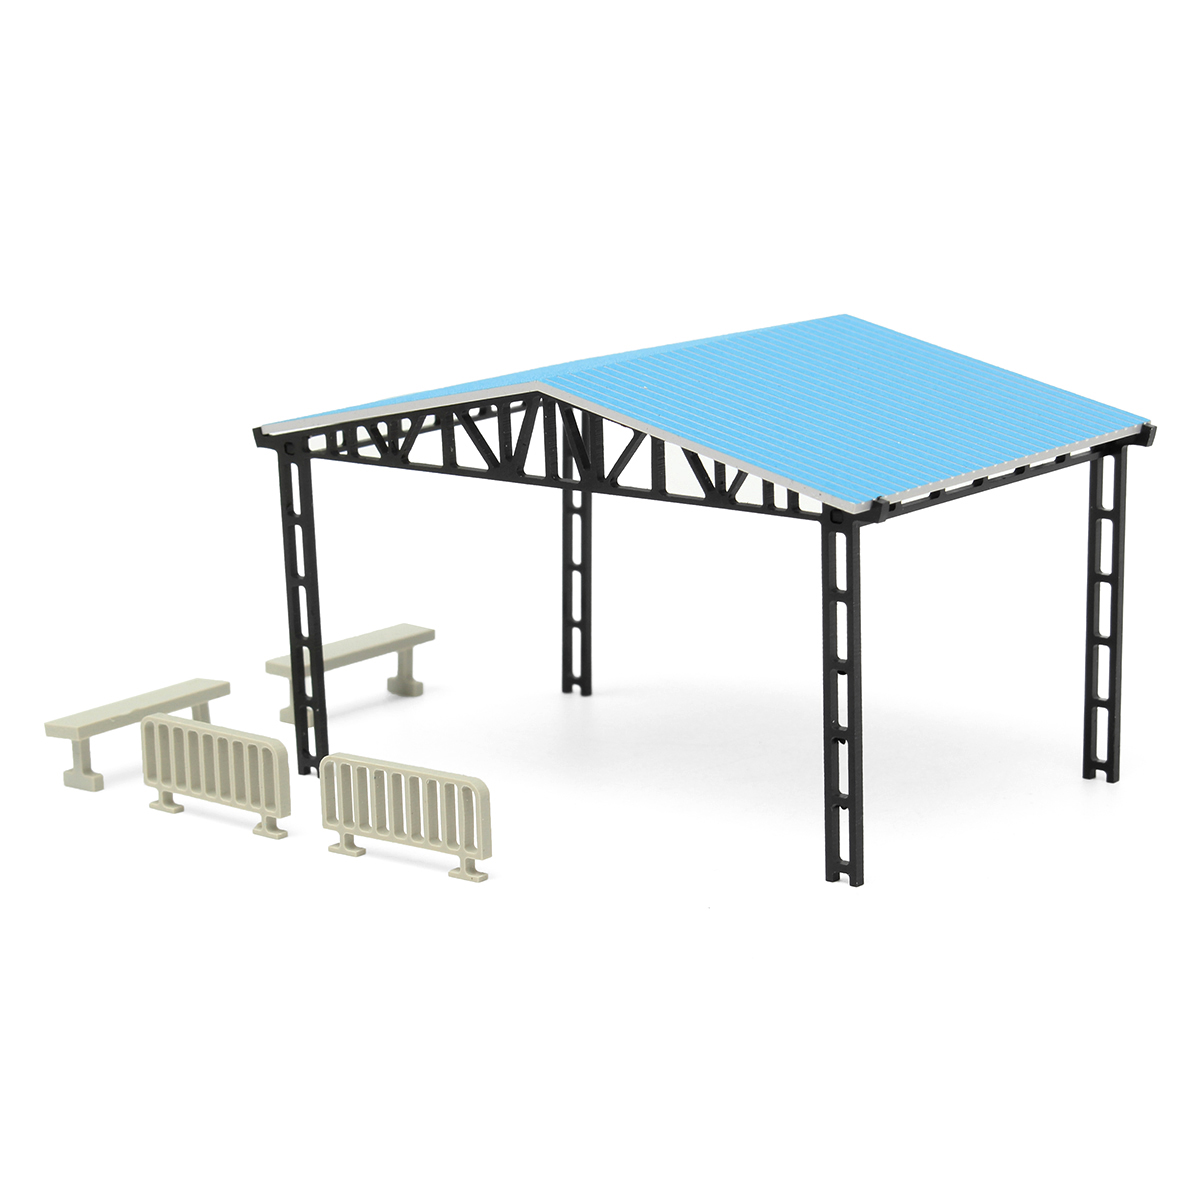 Model-Layout-Building-Parking-Shed-With-2-Fences-2-Benches-HO-Scale-187-Kit-1093333